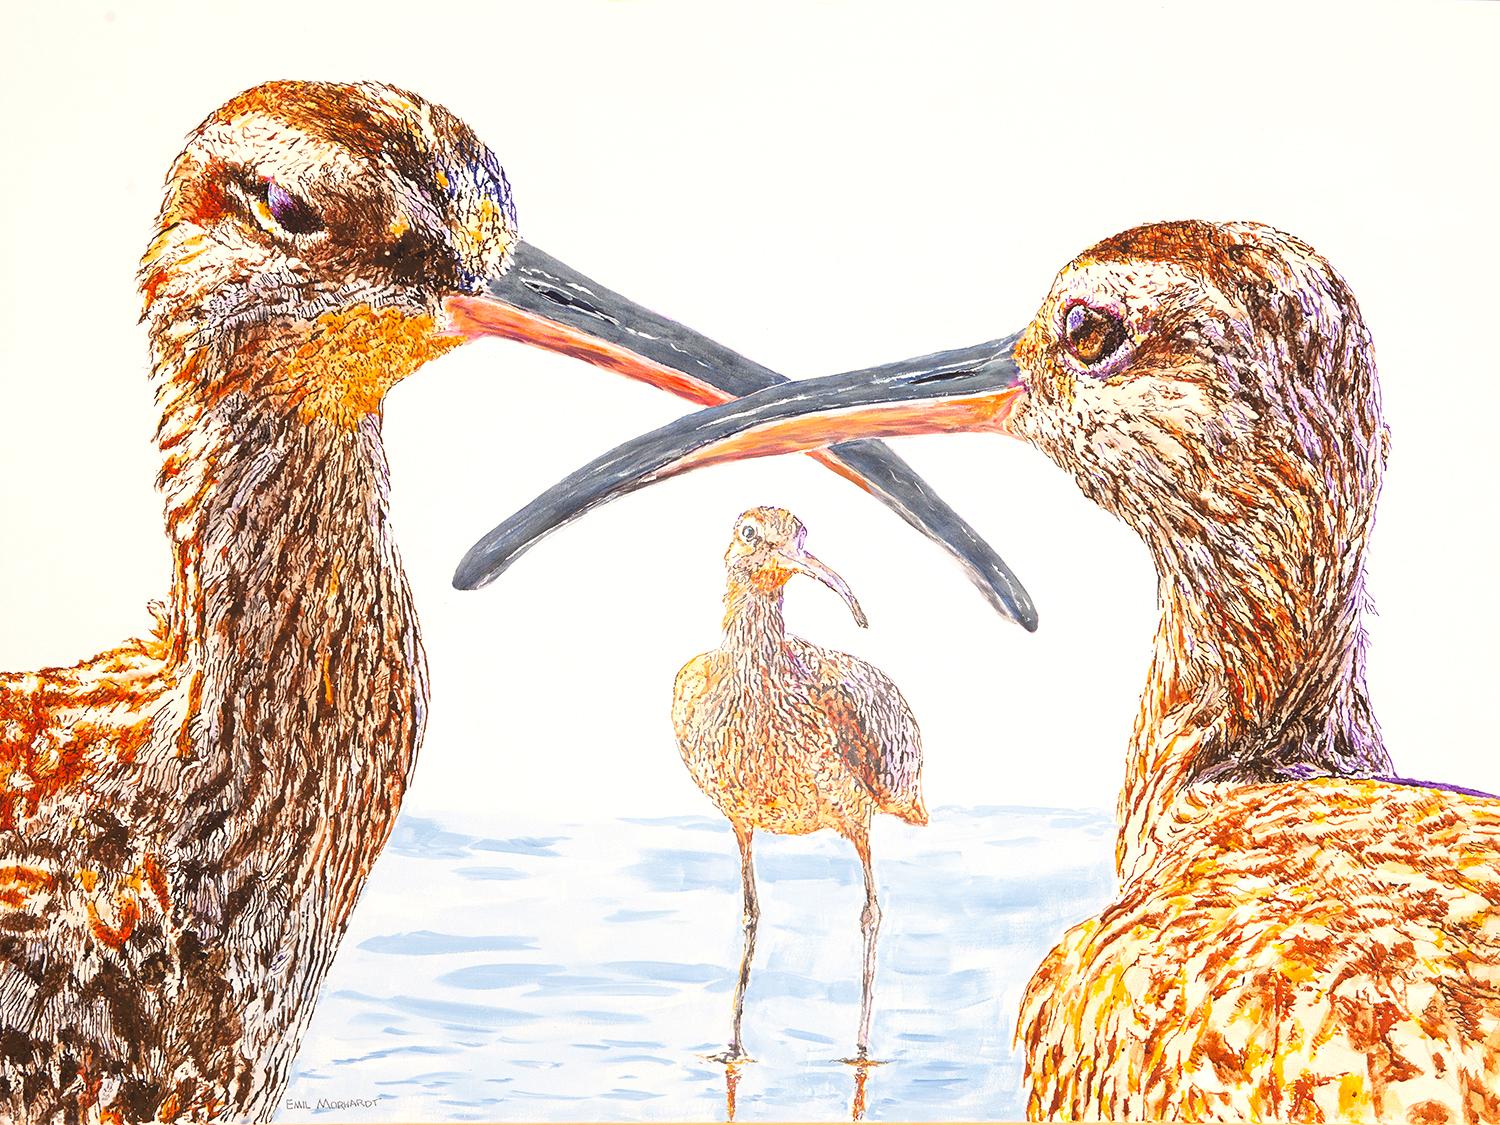 Three Whimbrels in Conversation, Original Painting - Art by Emil Morhardt